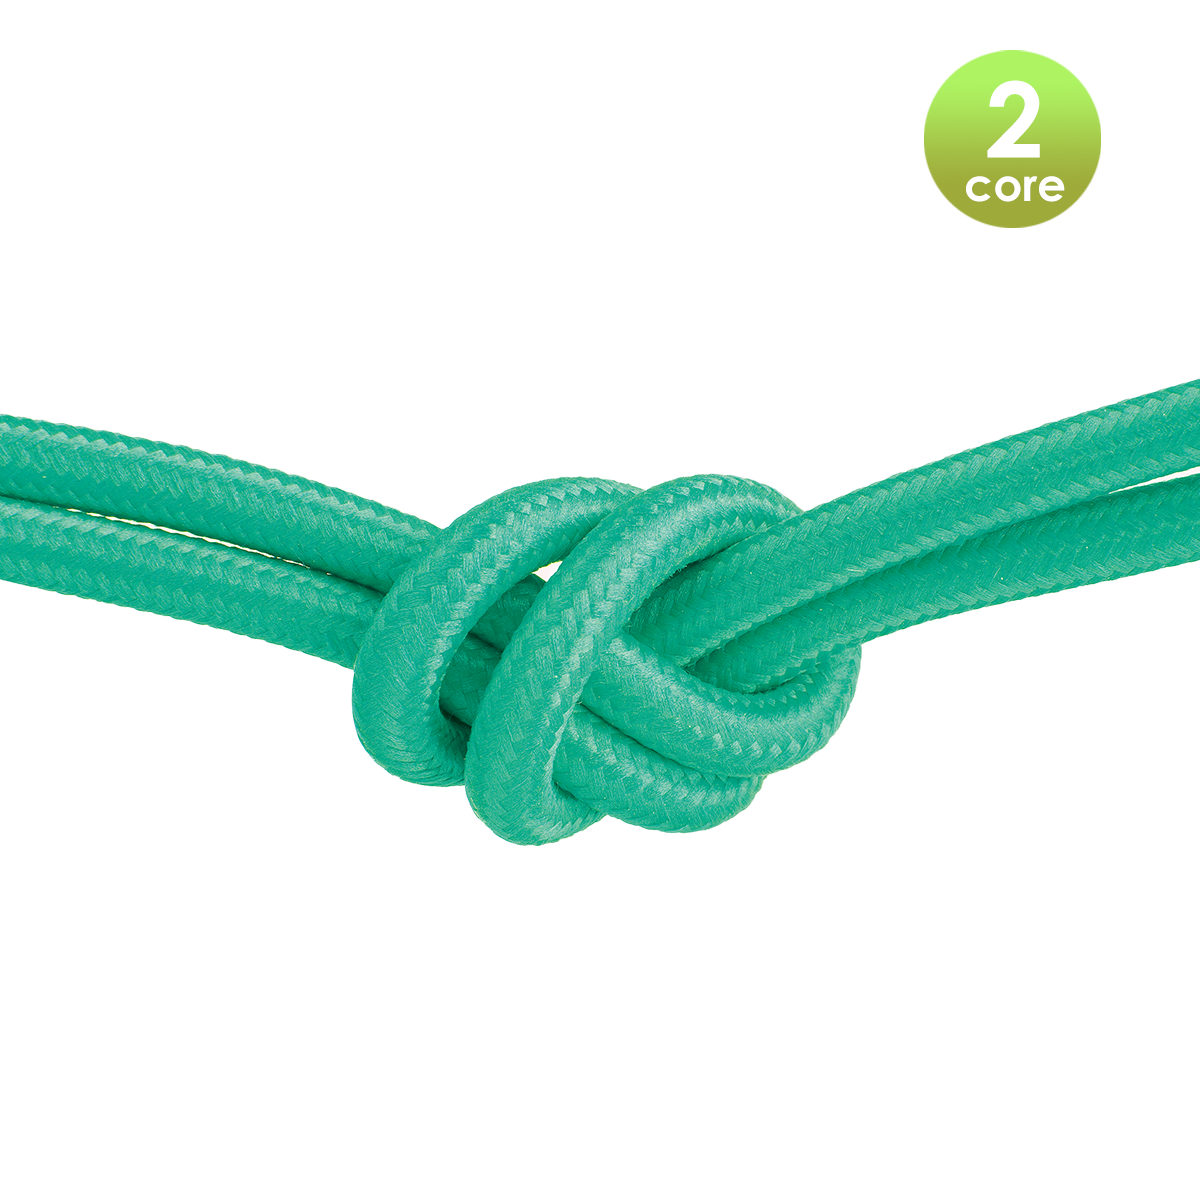 Tangla lighting - TLCB01004GN - Fabric cable 2 core - in forst green